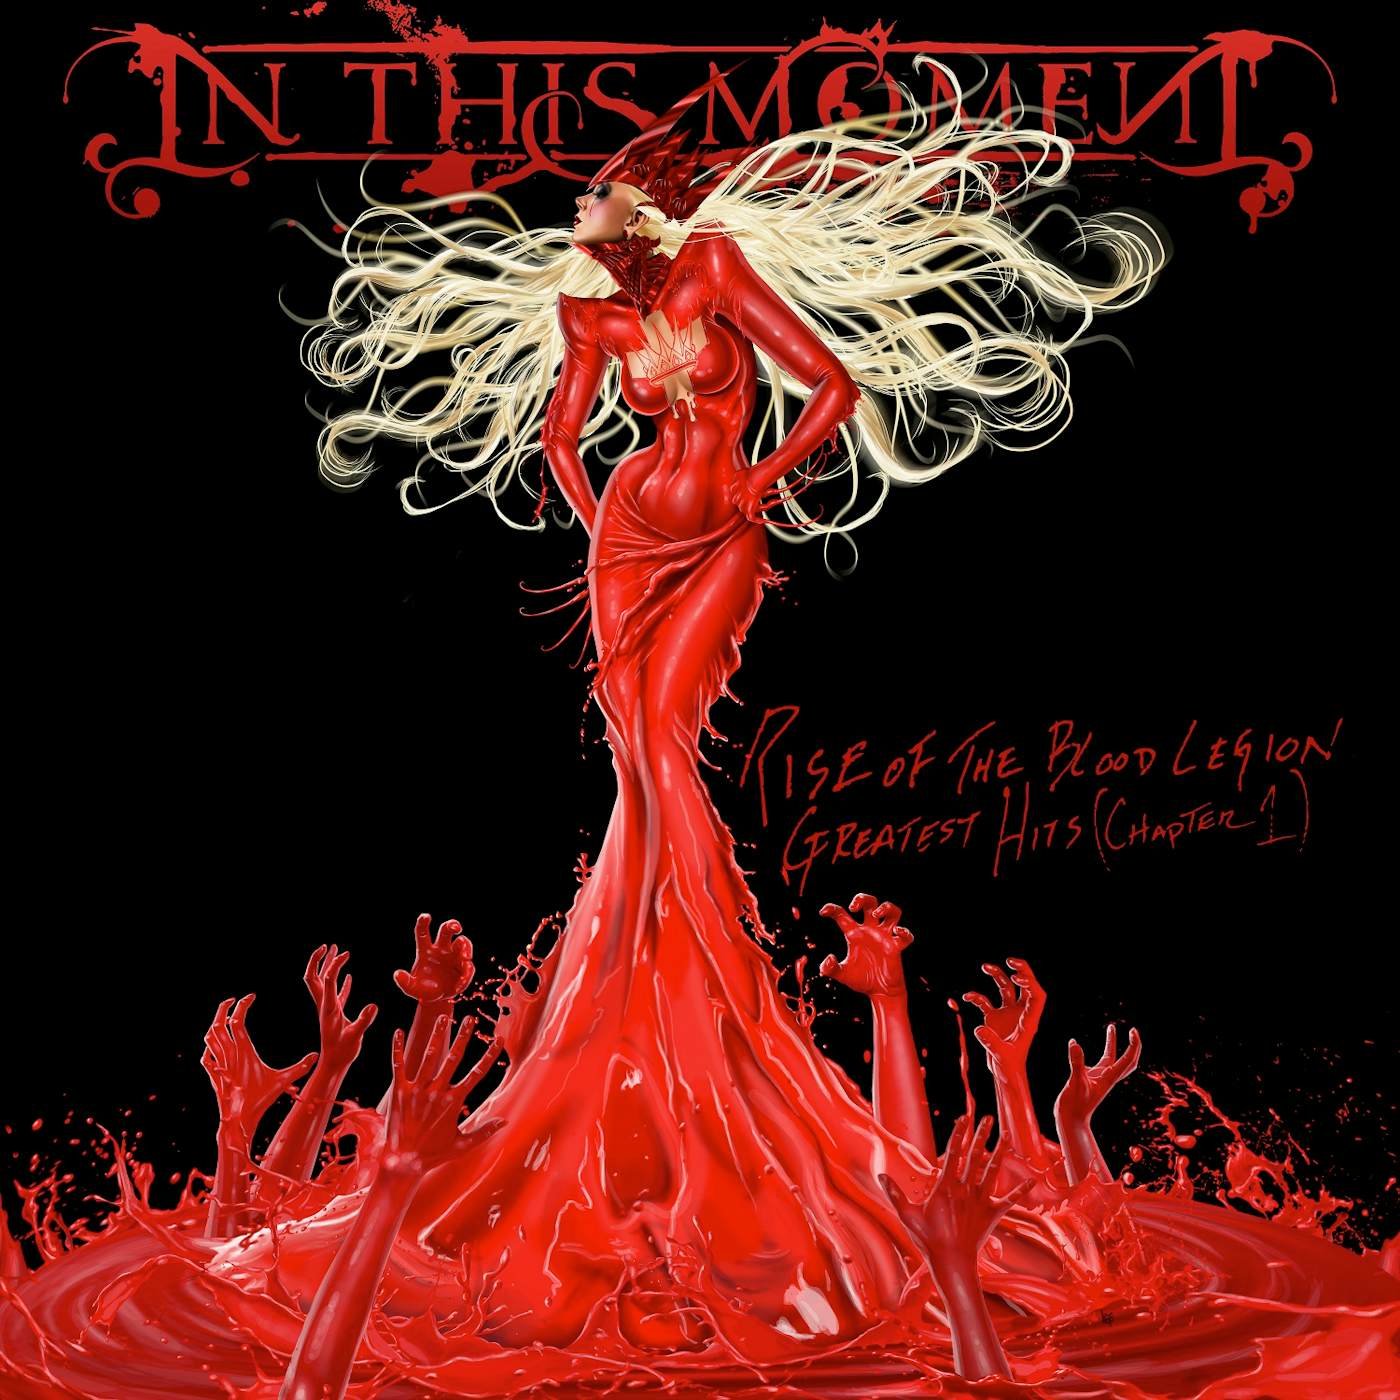 In This Moment RISE OF BLOOD LEGION: GREATEST HITS (CHAPTER 1) CD